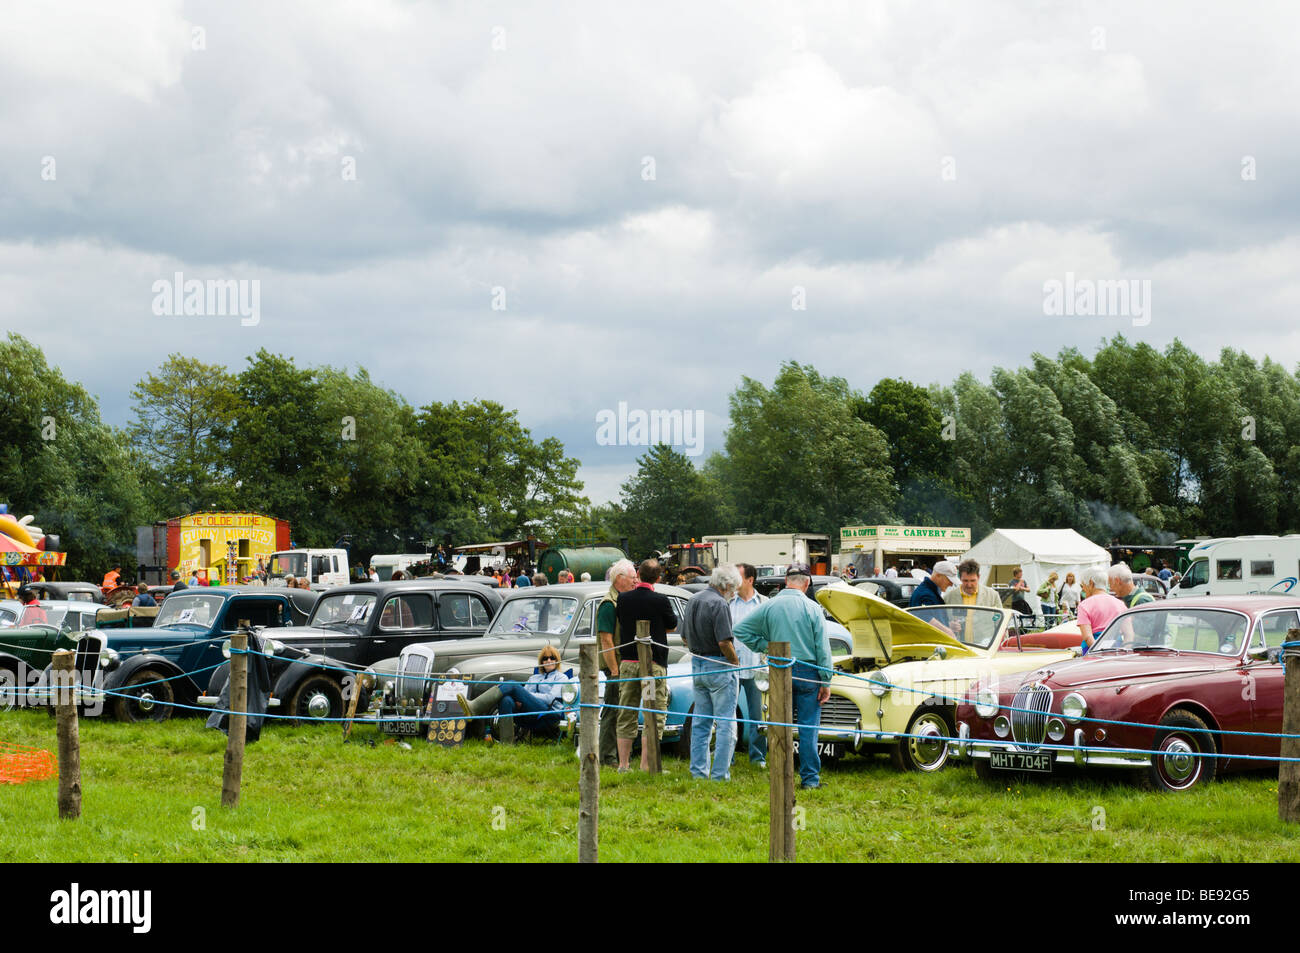 People admiring classic cars at a steam rally Stock Photo